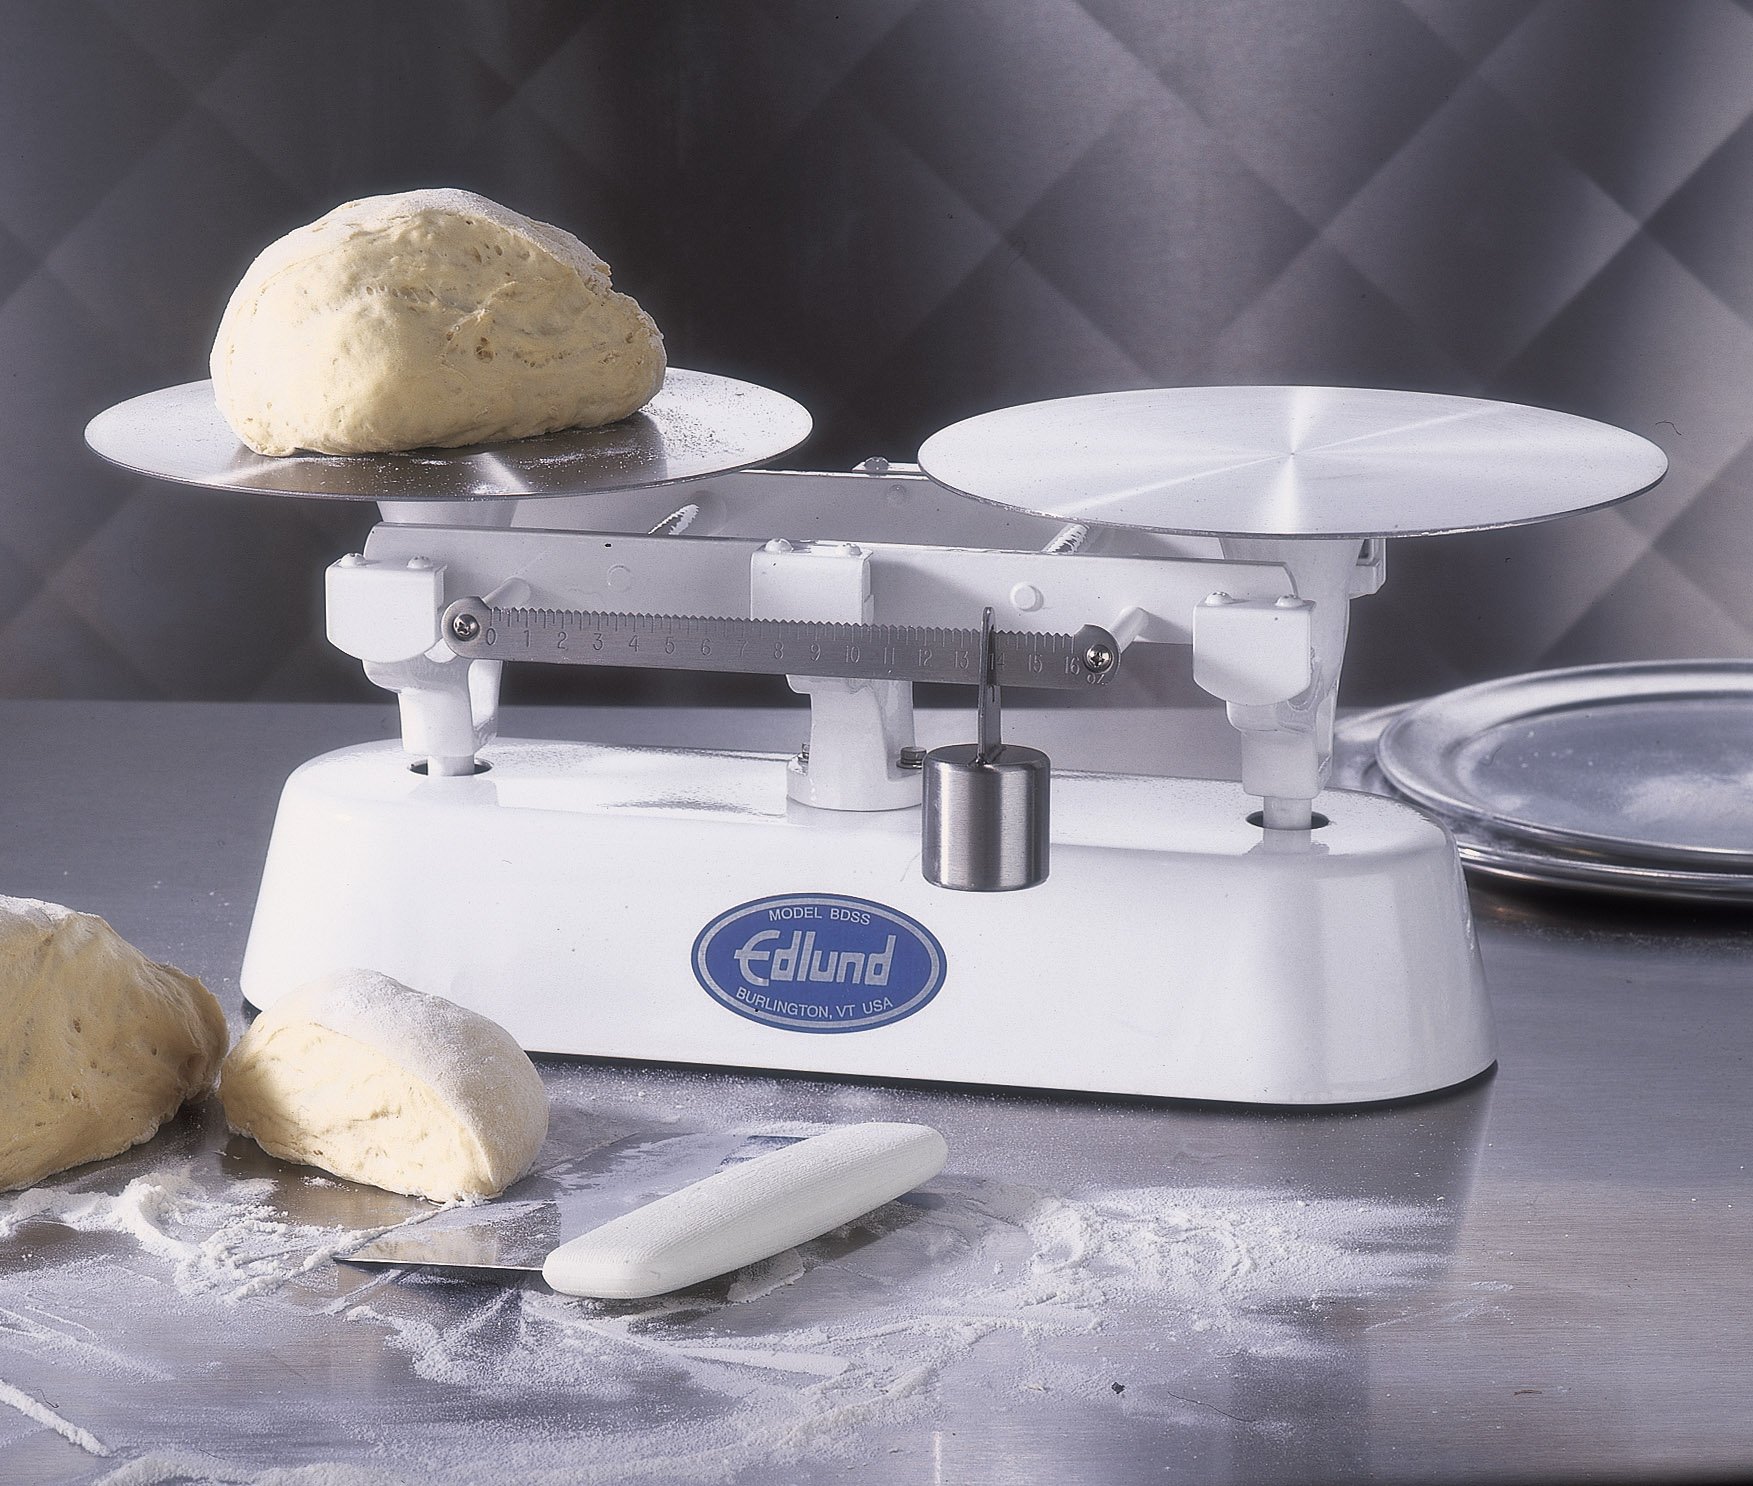 https://www.edlundco.com/wp-content/uploads/2014/04/Deluxe_Bakers_Dough_Scale.jpg